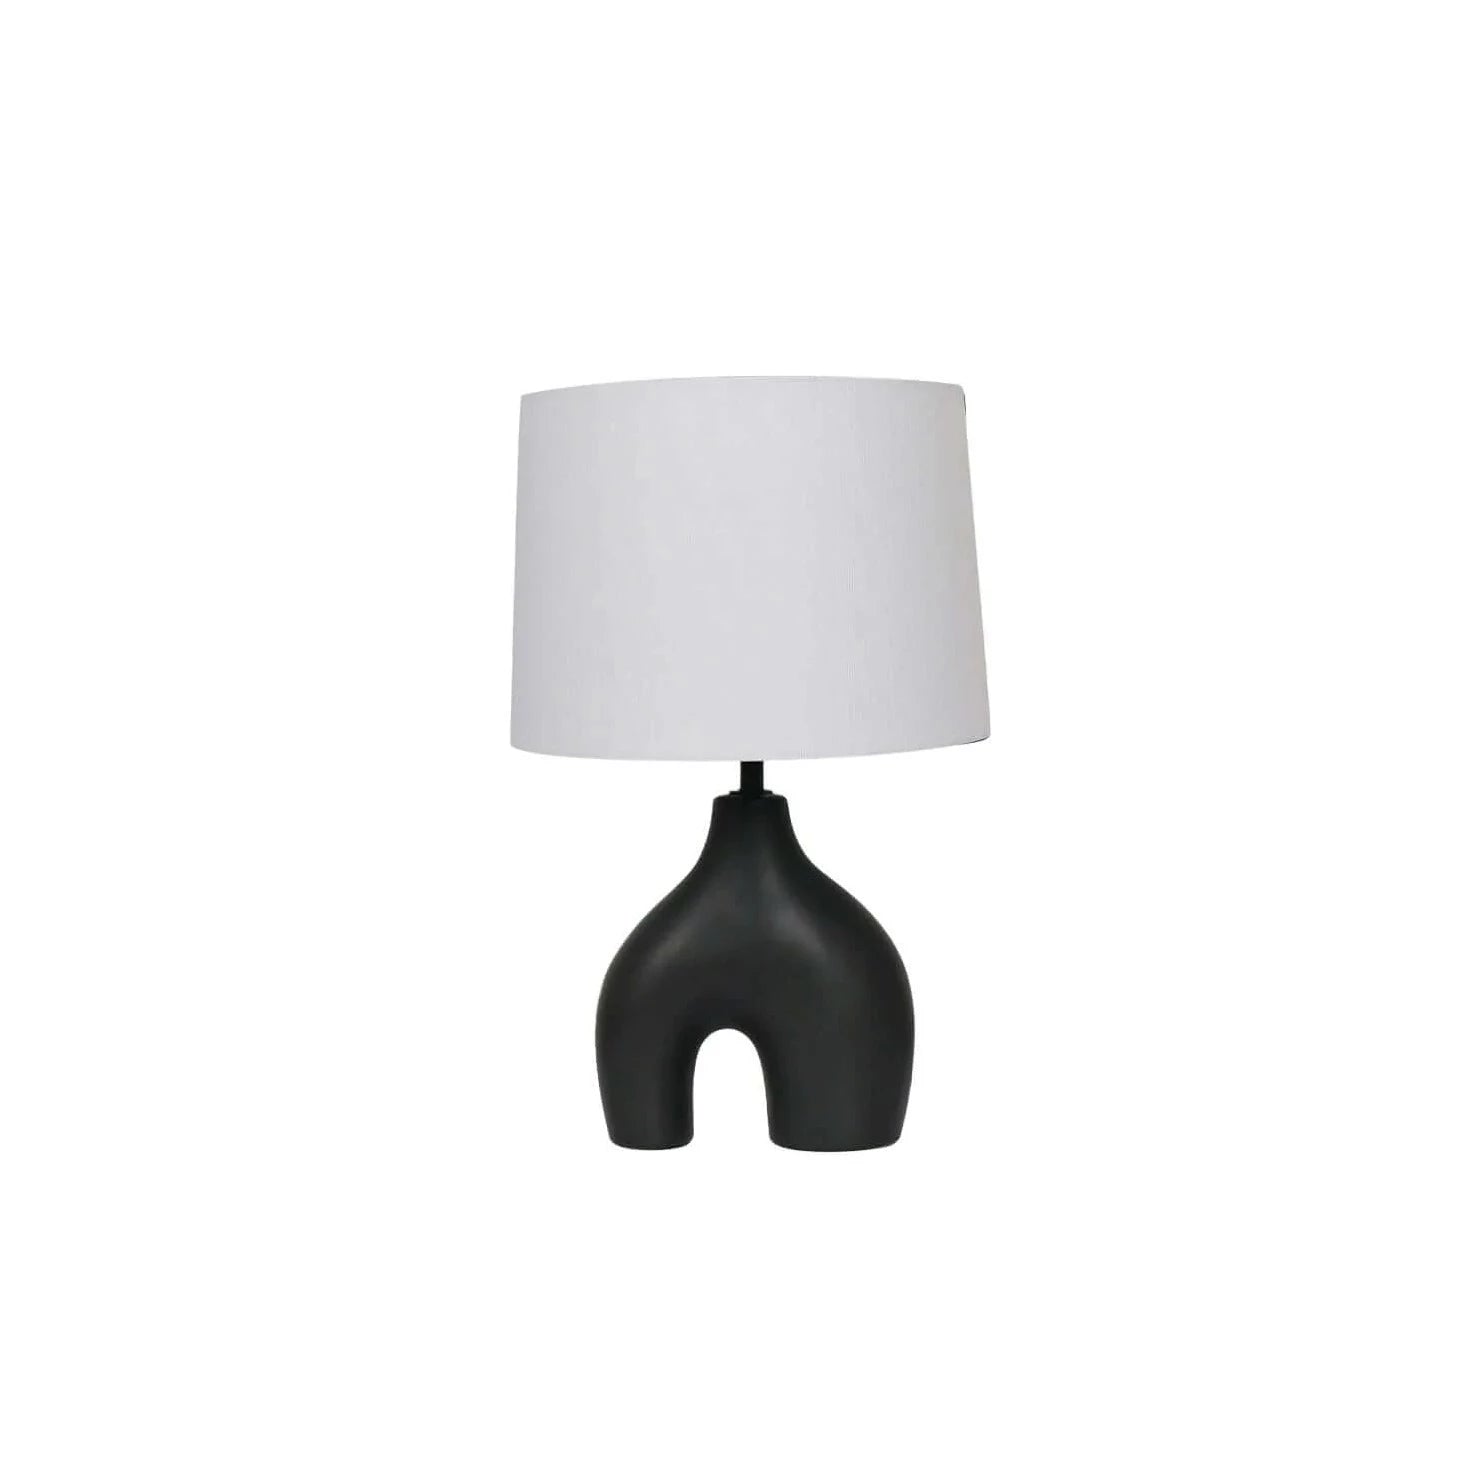 Pluto Lamp and Shade (39 cm) - MHF Decor-Delights